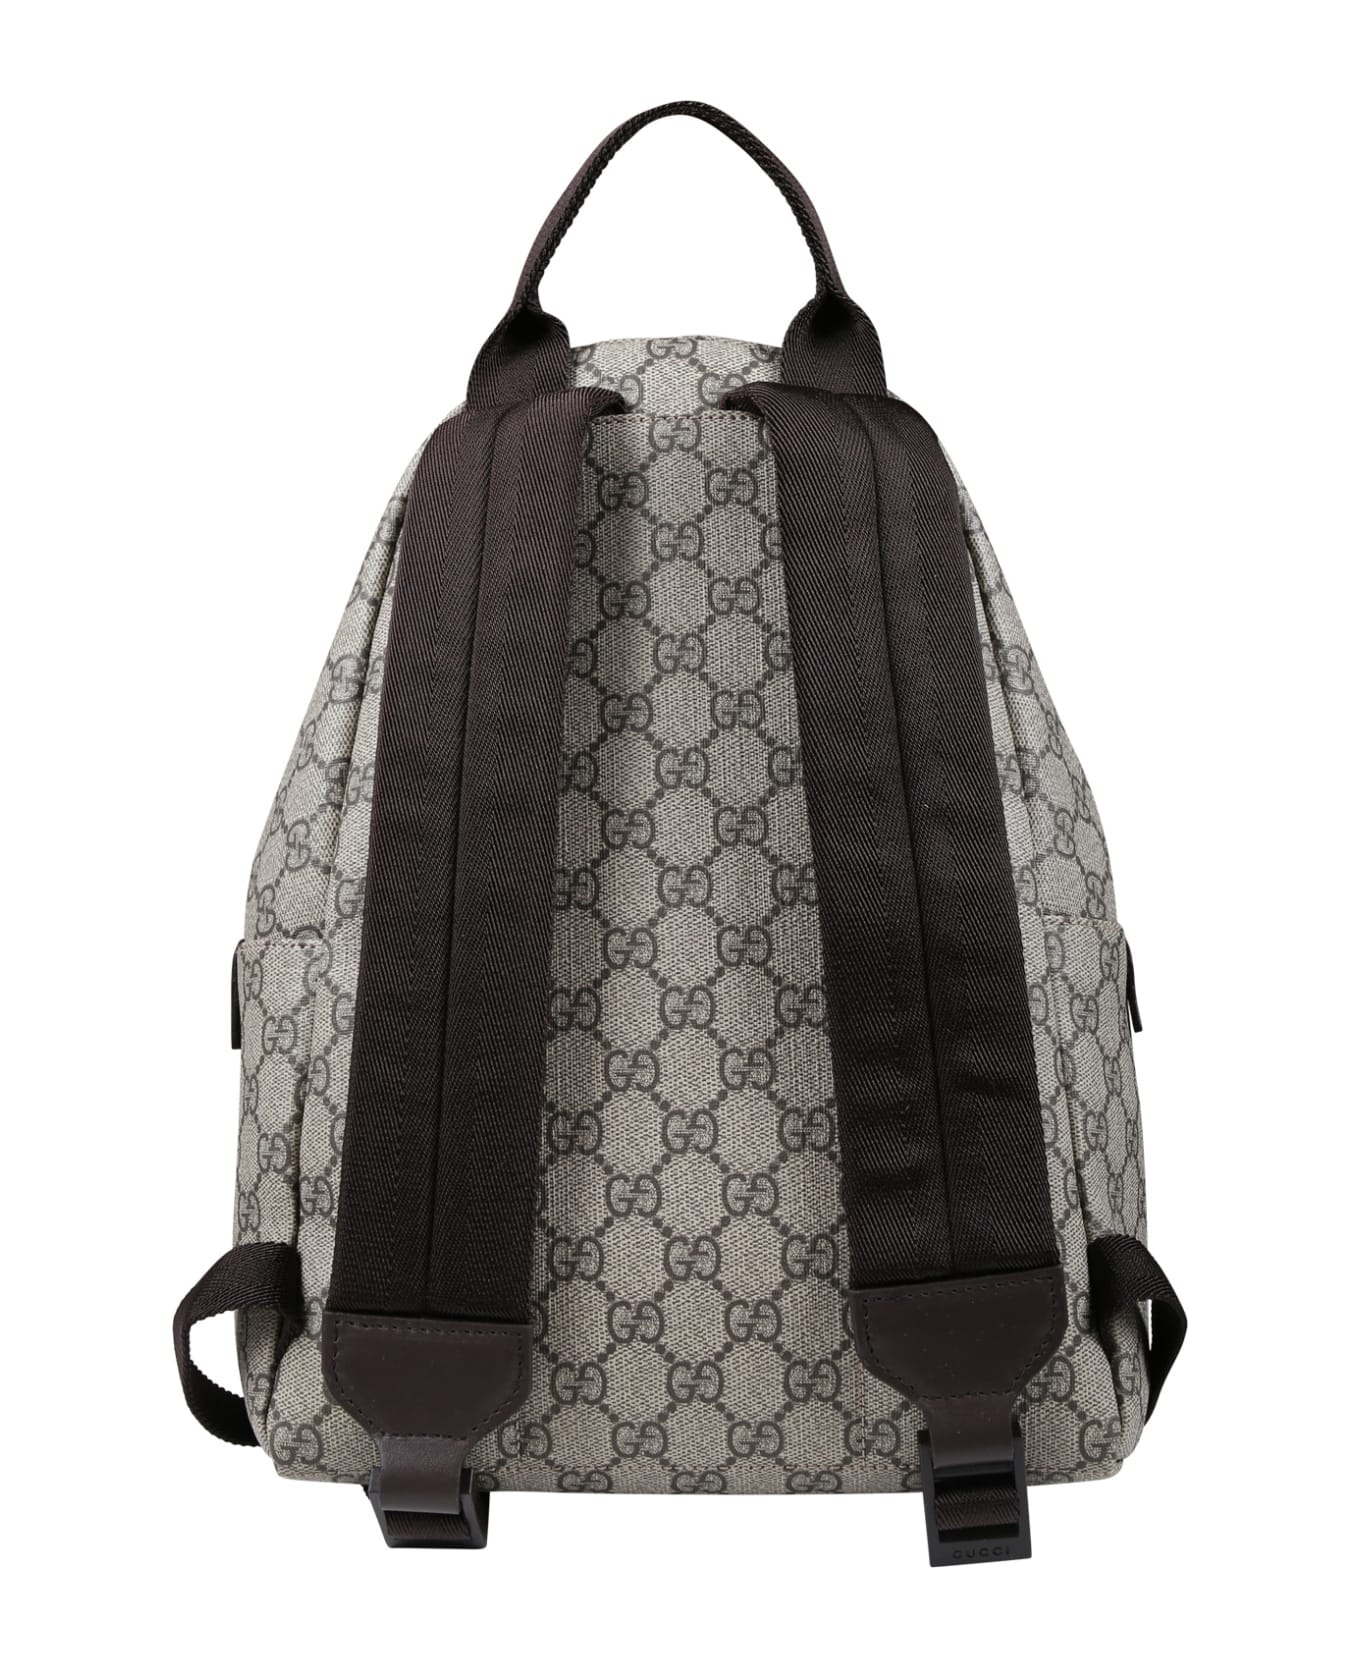 Gucci Brown Backpack For Kids With Gg Motif - Beige